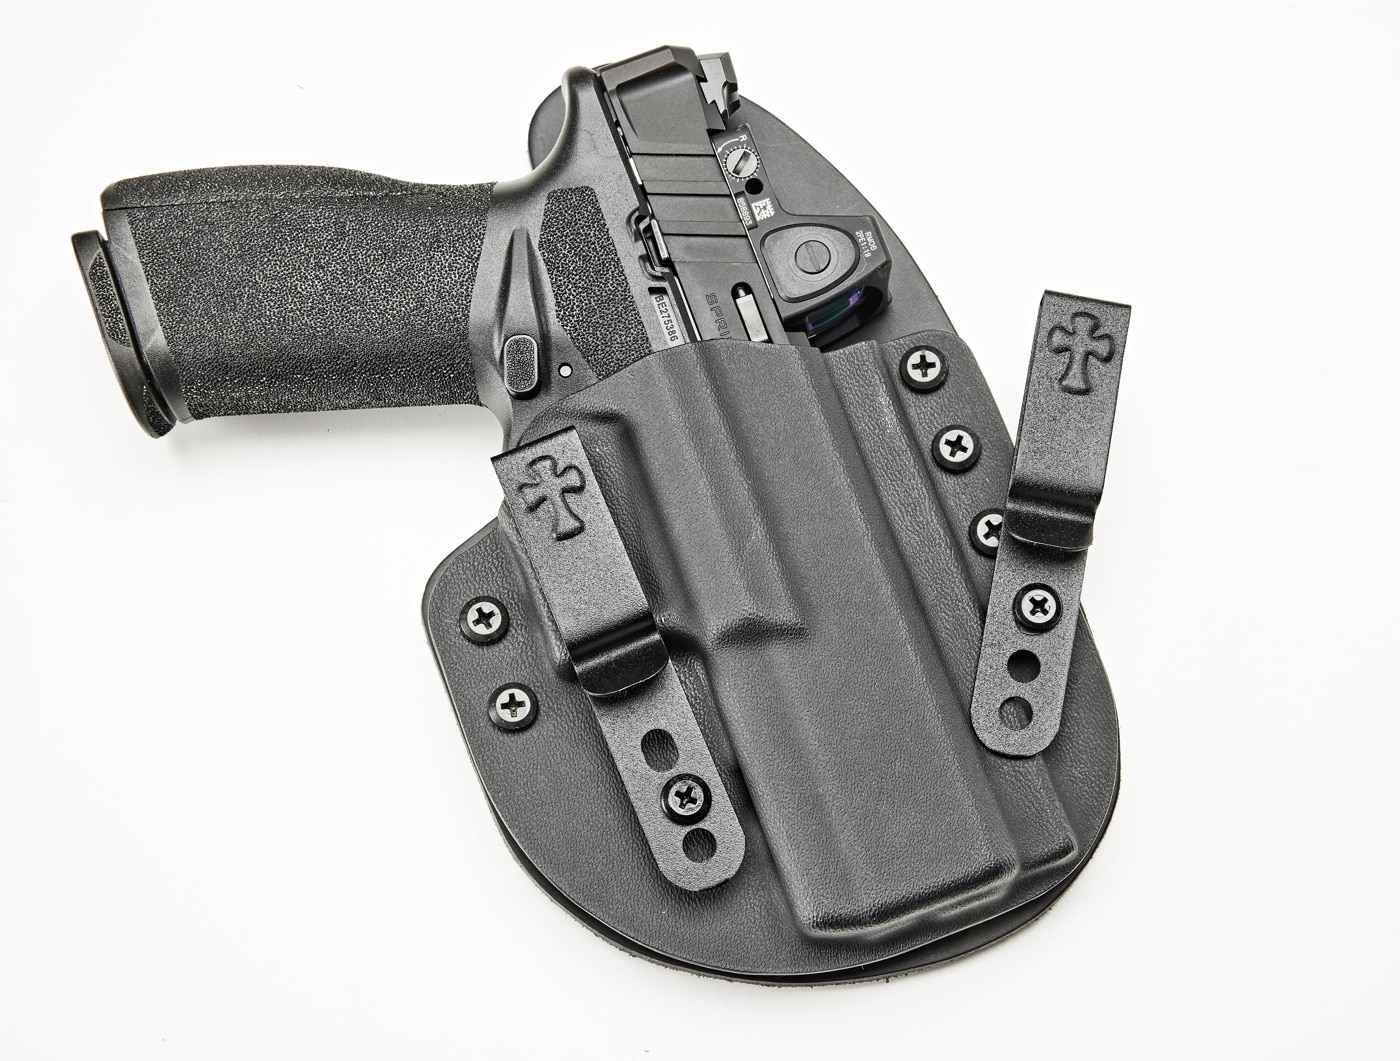 In this photo, we see the Springfield Armory Echelon 9mm semi-automatic pistol in a CrossBreed Reckoning holster. A handgun holster is a device used to hold or restrict the undesired movement of a handgun, most commonly in a location where it can be easily withdrawn for immediate use.